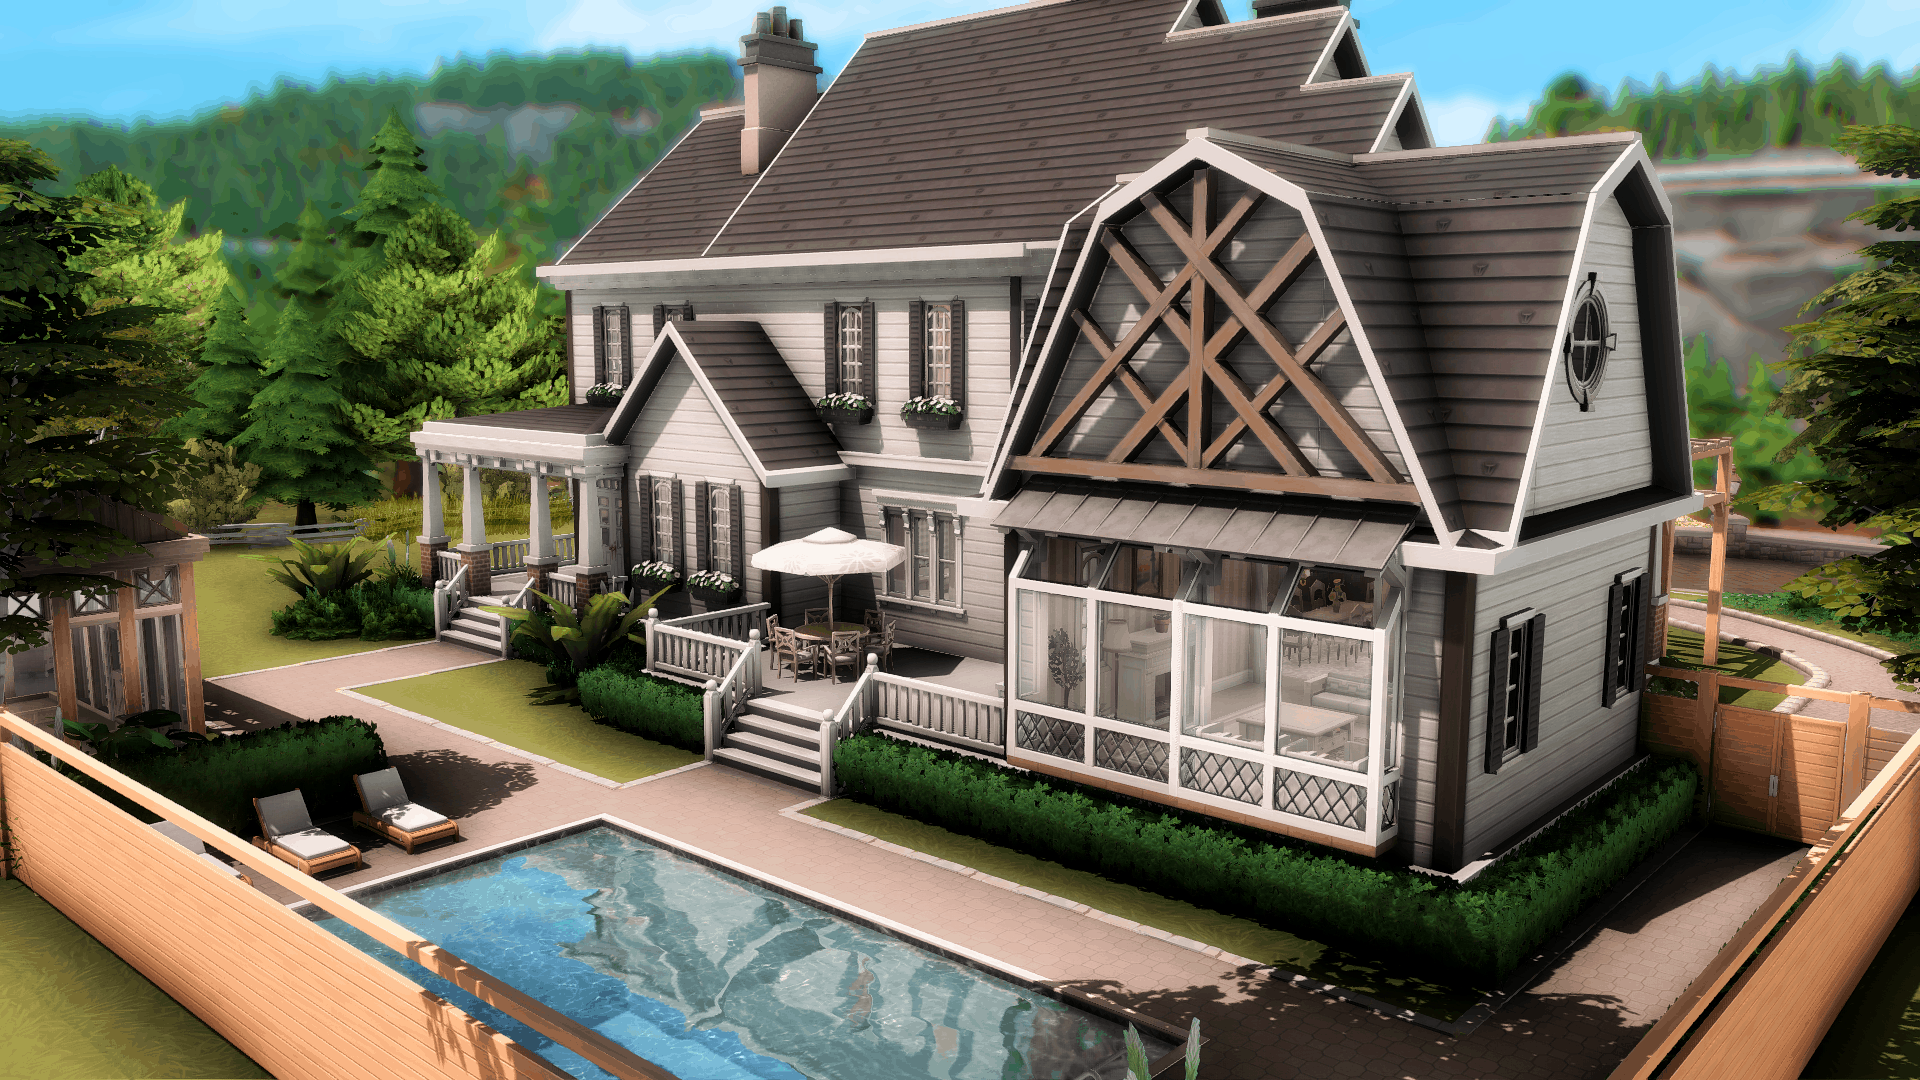 sims 4 house cc download